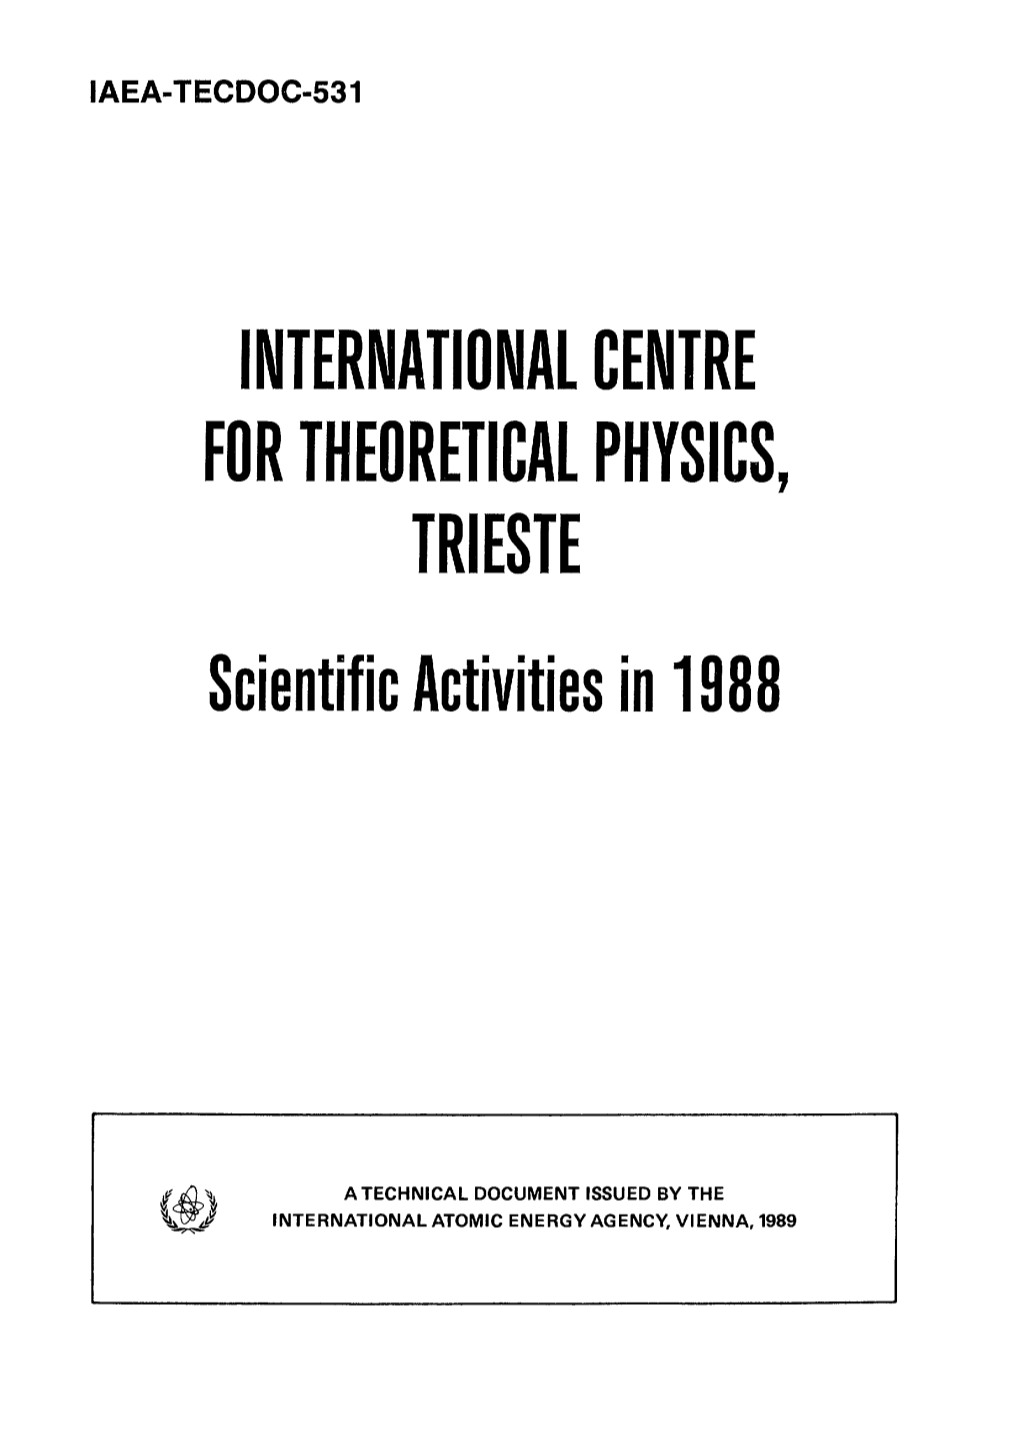 INTERNATIONAL CENTRE for THEORETICAL PHYSICS, TRIESTE Scientific Activities in 1988